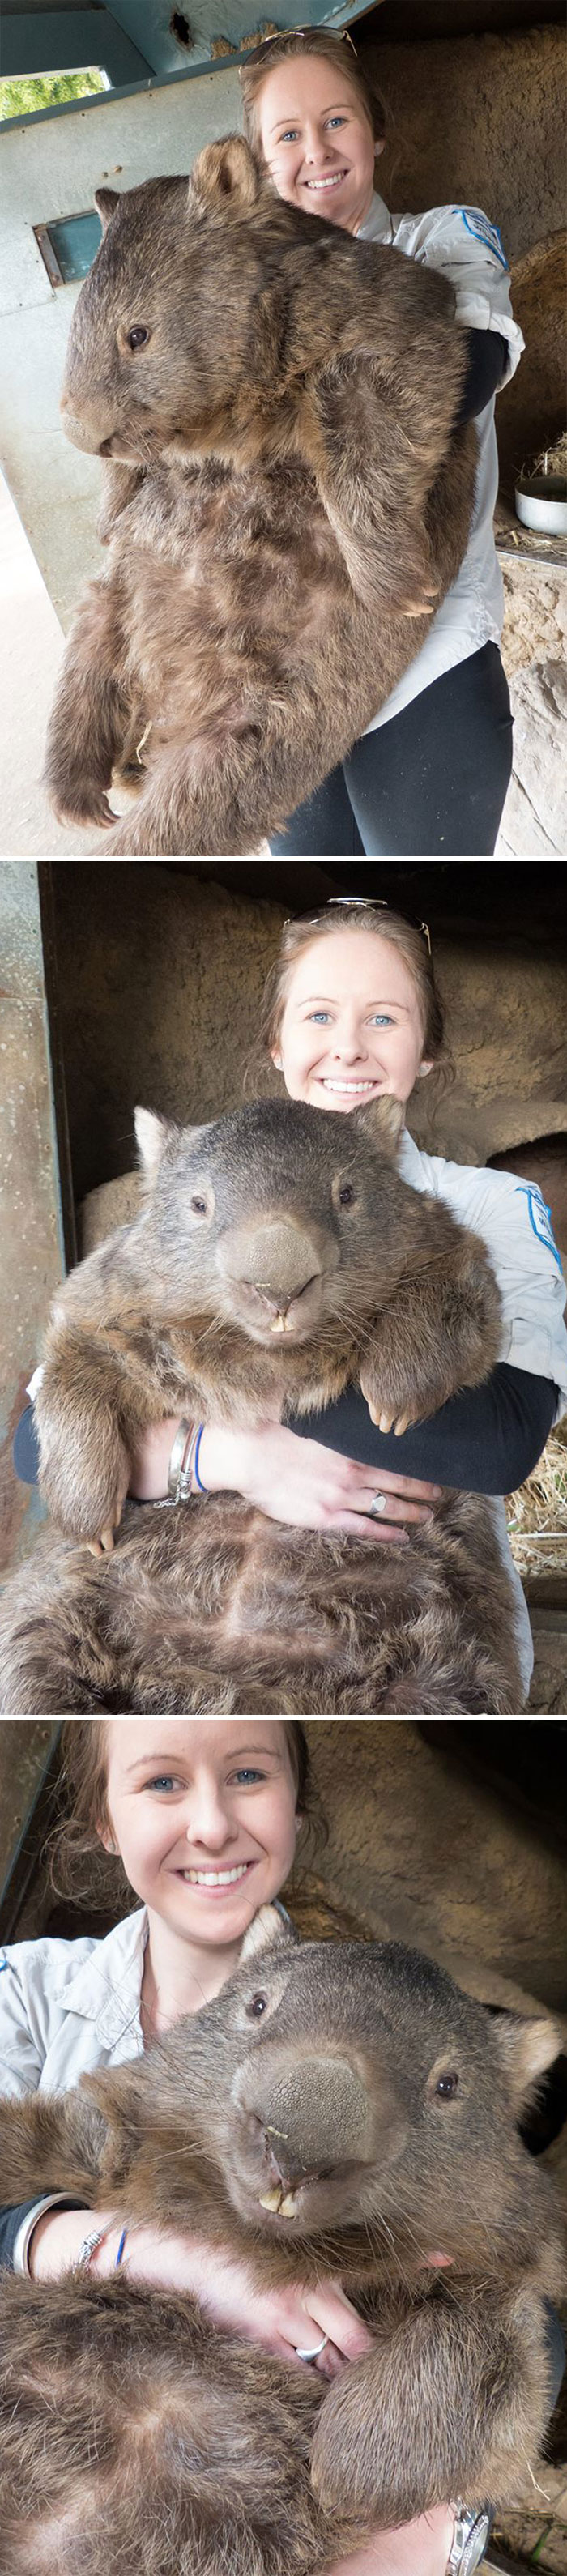 This Wombat, Human For Scale